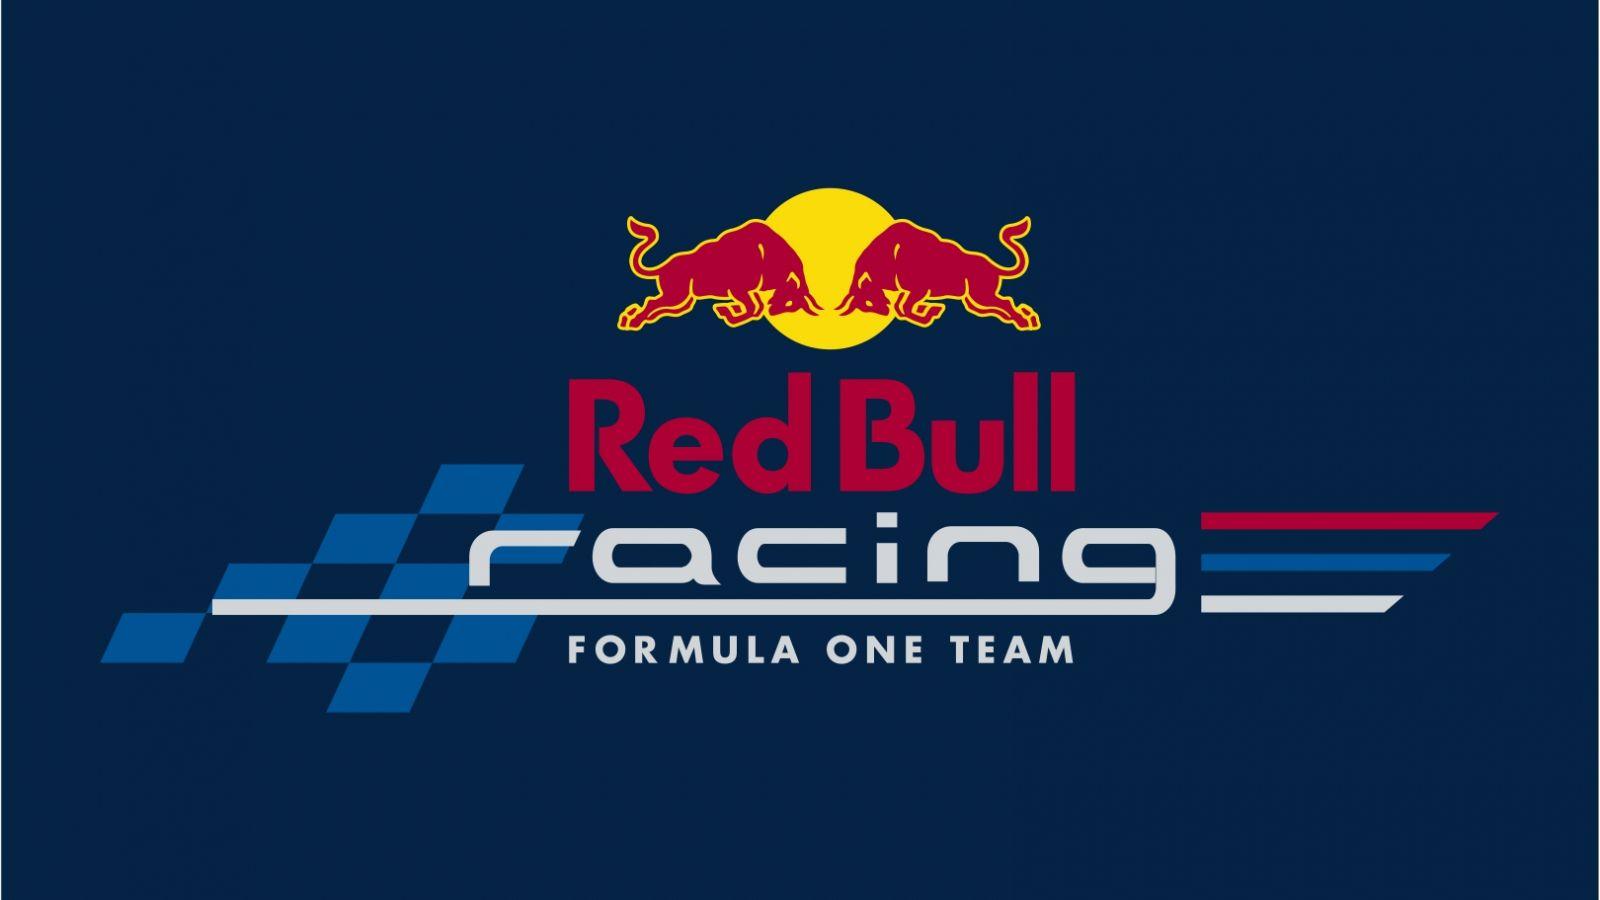 Red Bull Racing F1 Wallpapers - Top Free Red Bull Racing F1 Backgrounds ...